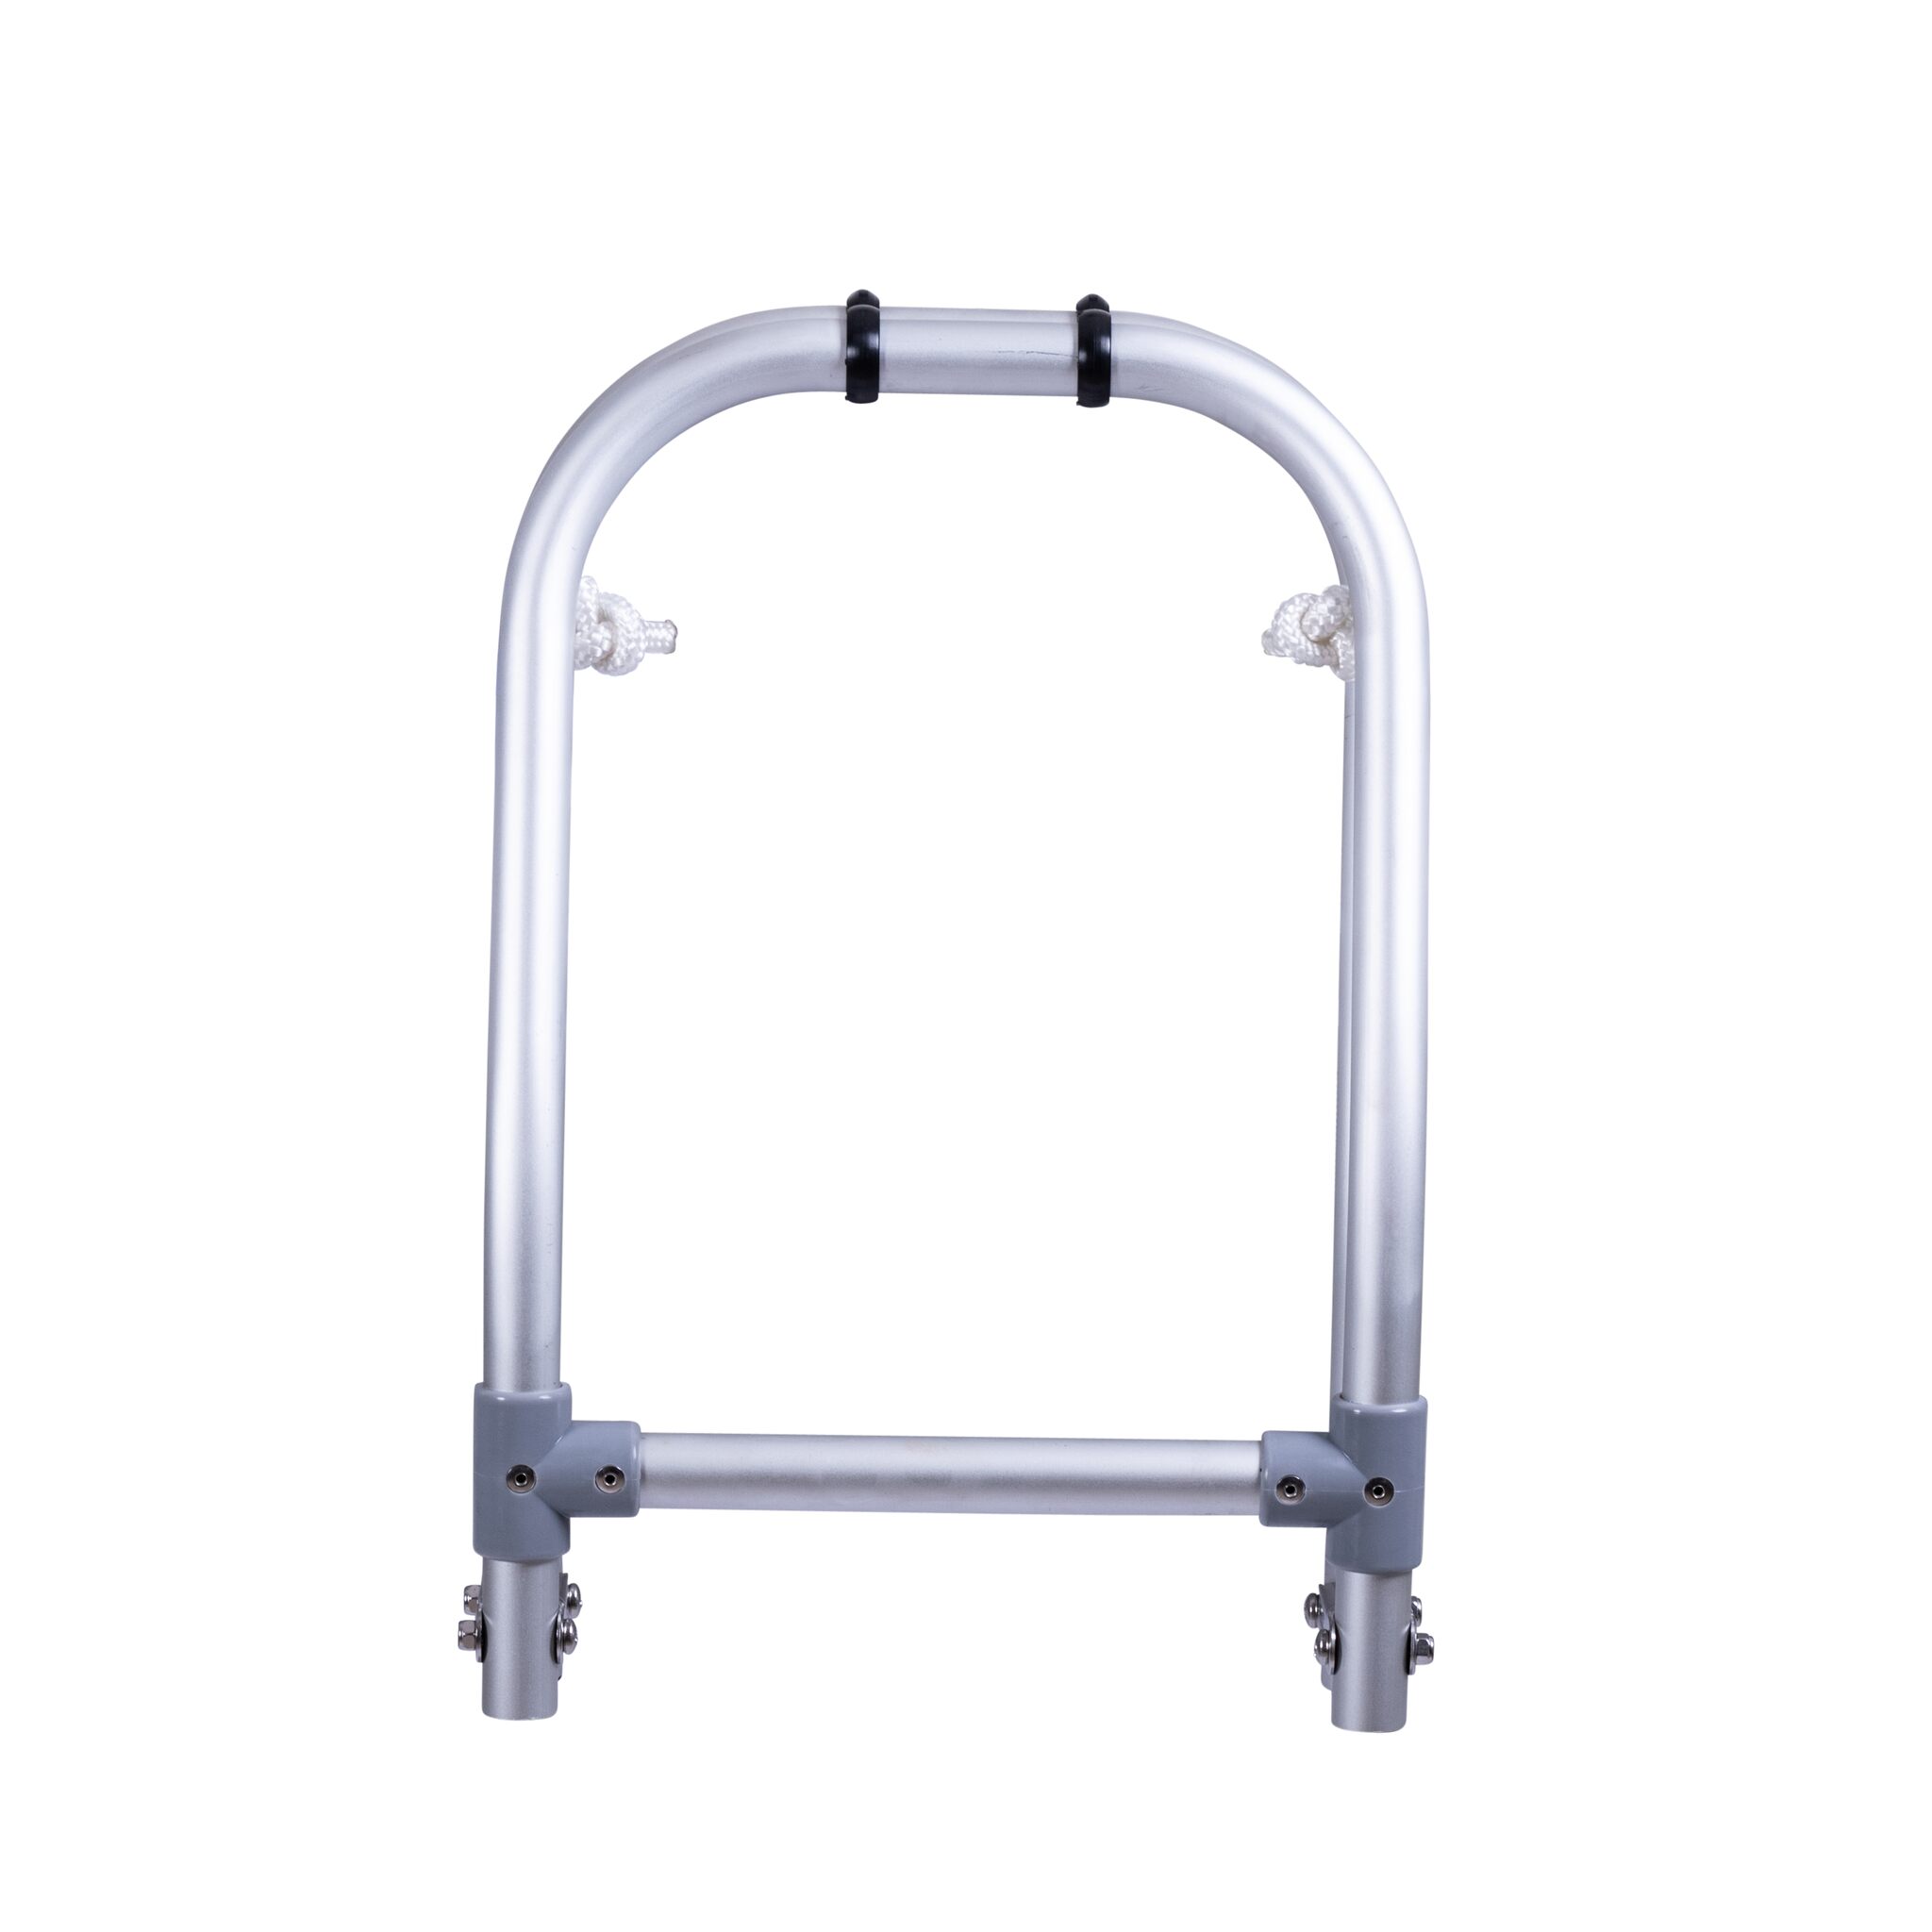 OSCULATI swim ladder for inflatable boats